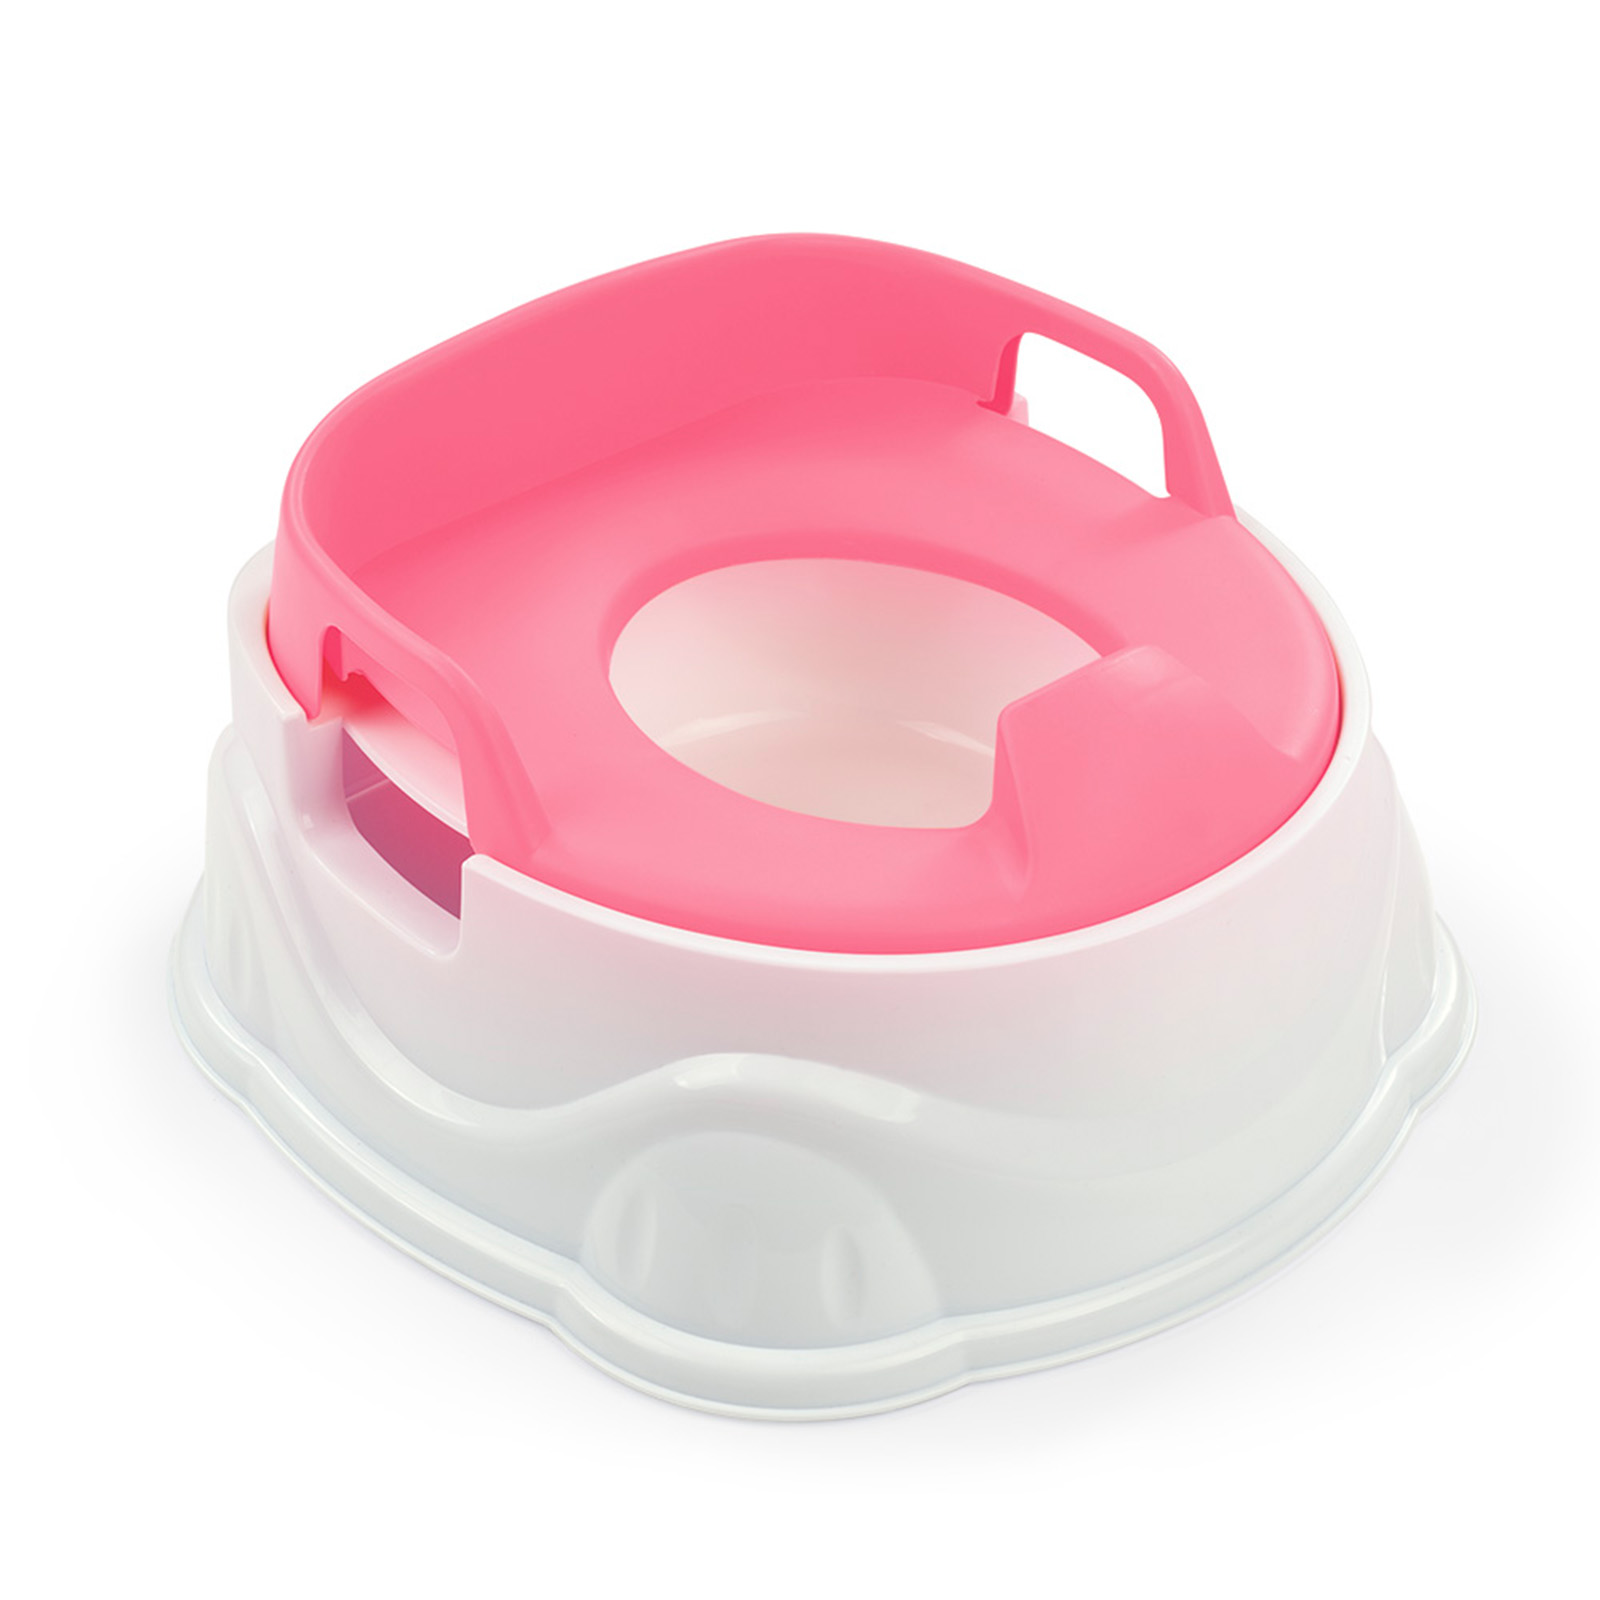 Kids 3 in 1 Potty, Toilet Seat and Step Stool - White and Pink